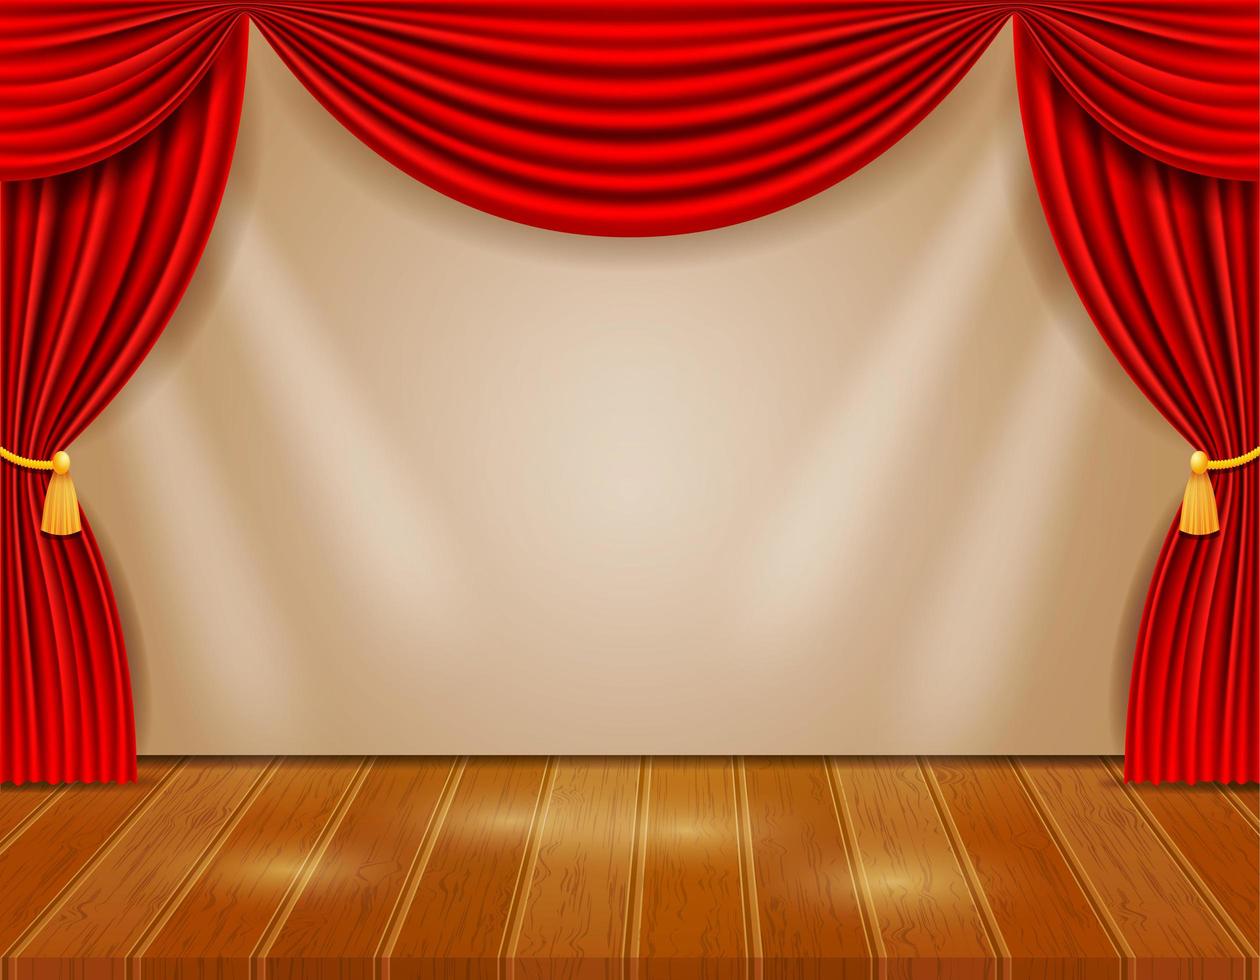 Theater stage with red curtains vector